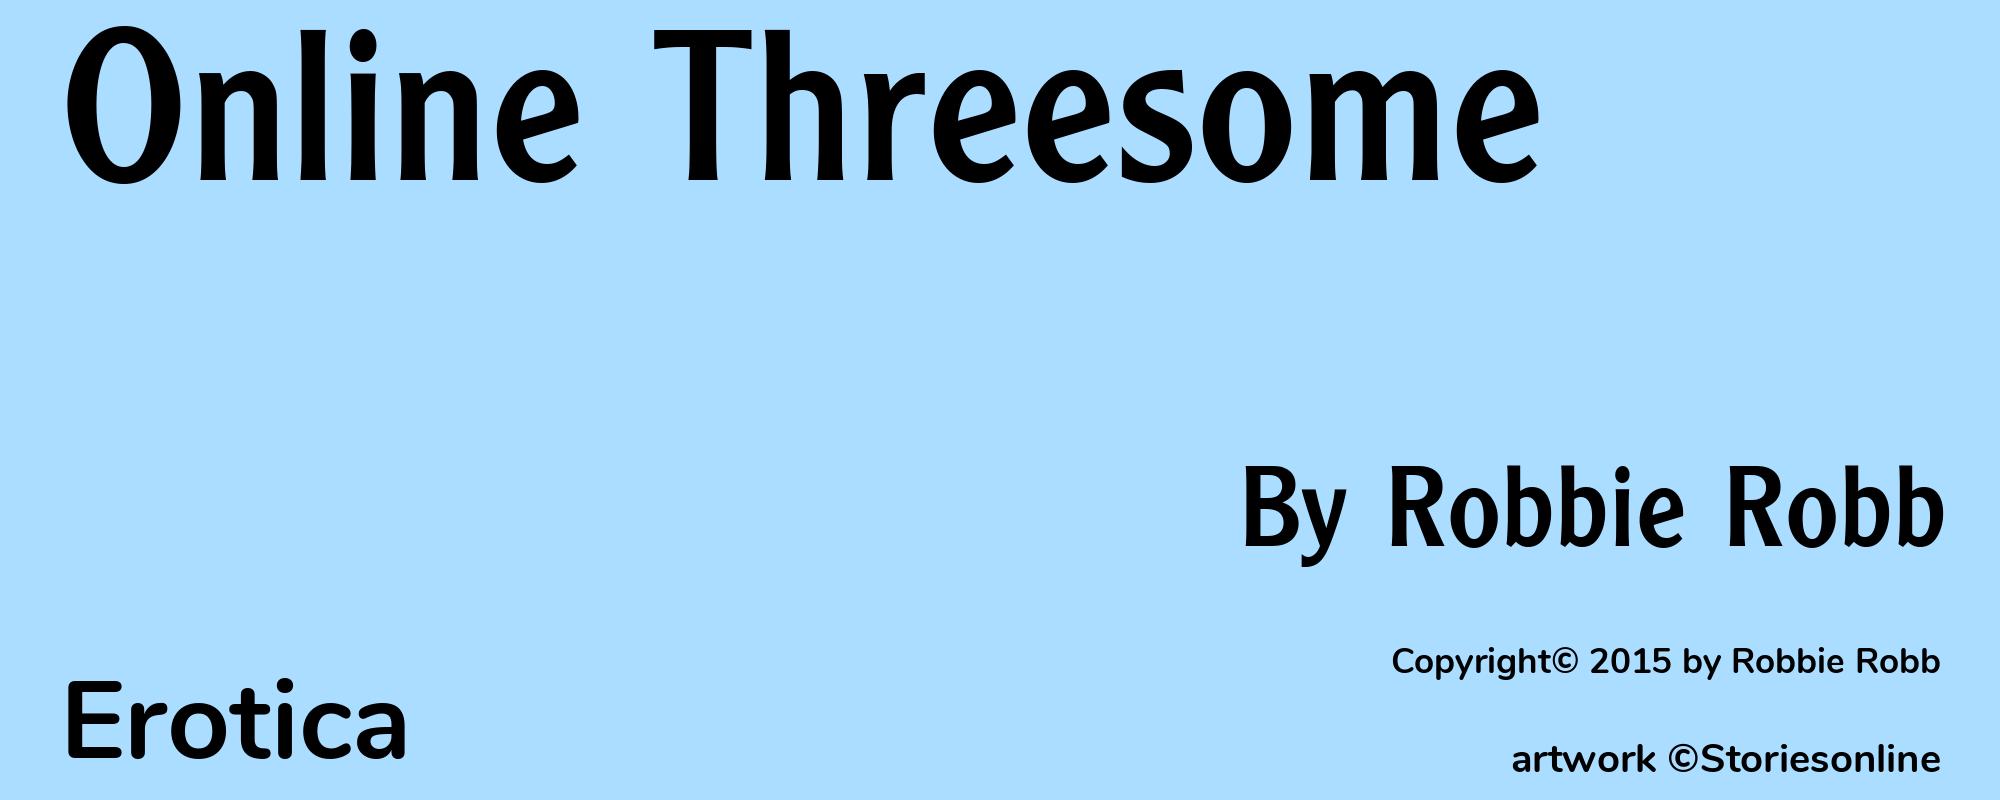 Online Threesome - Cover